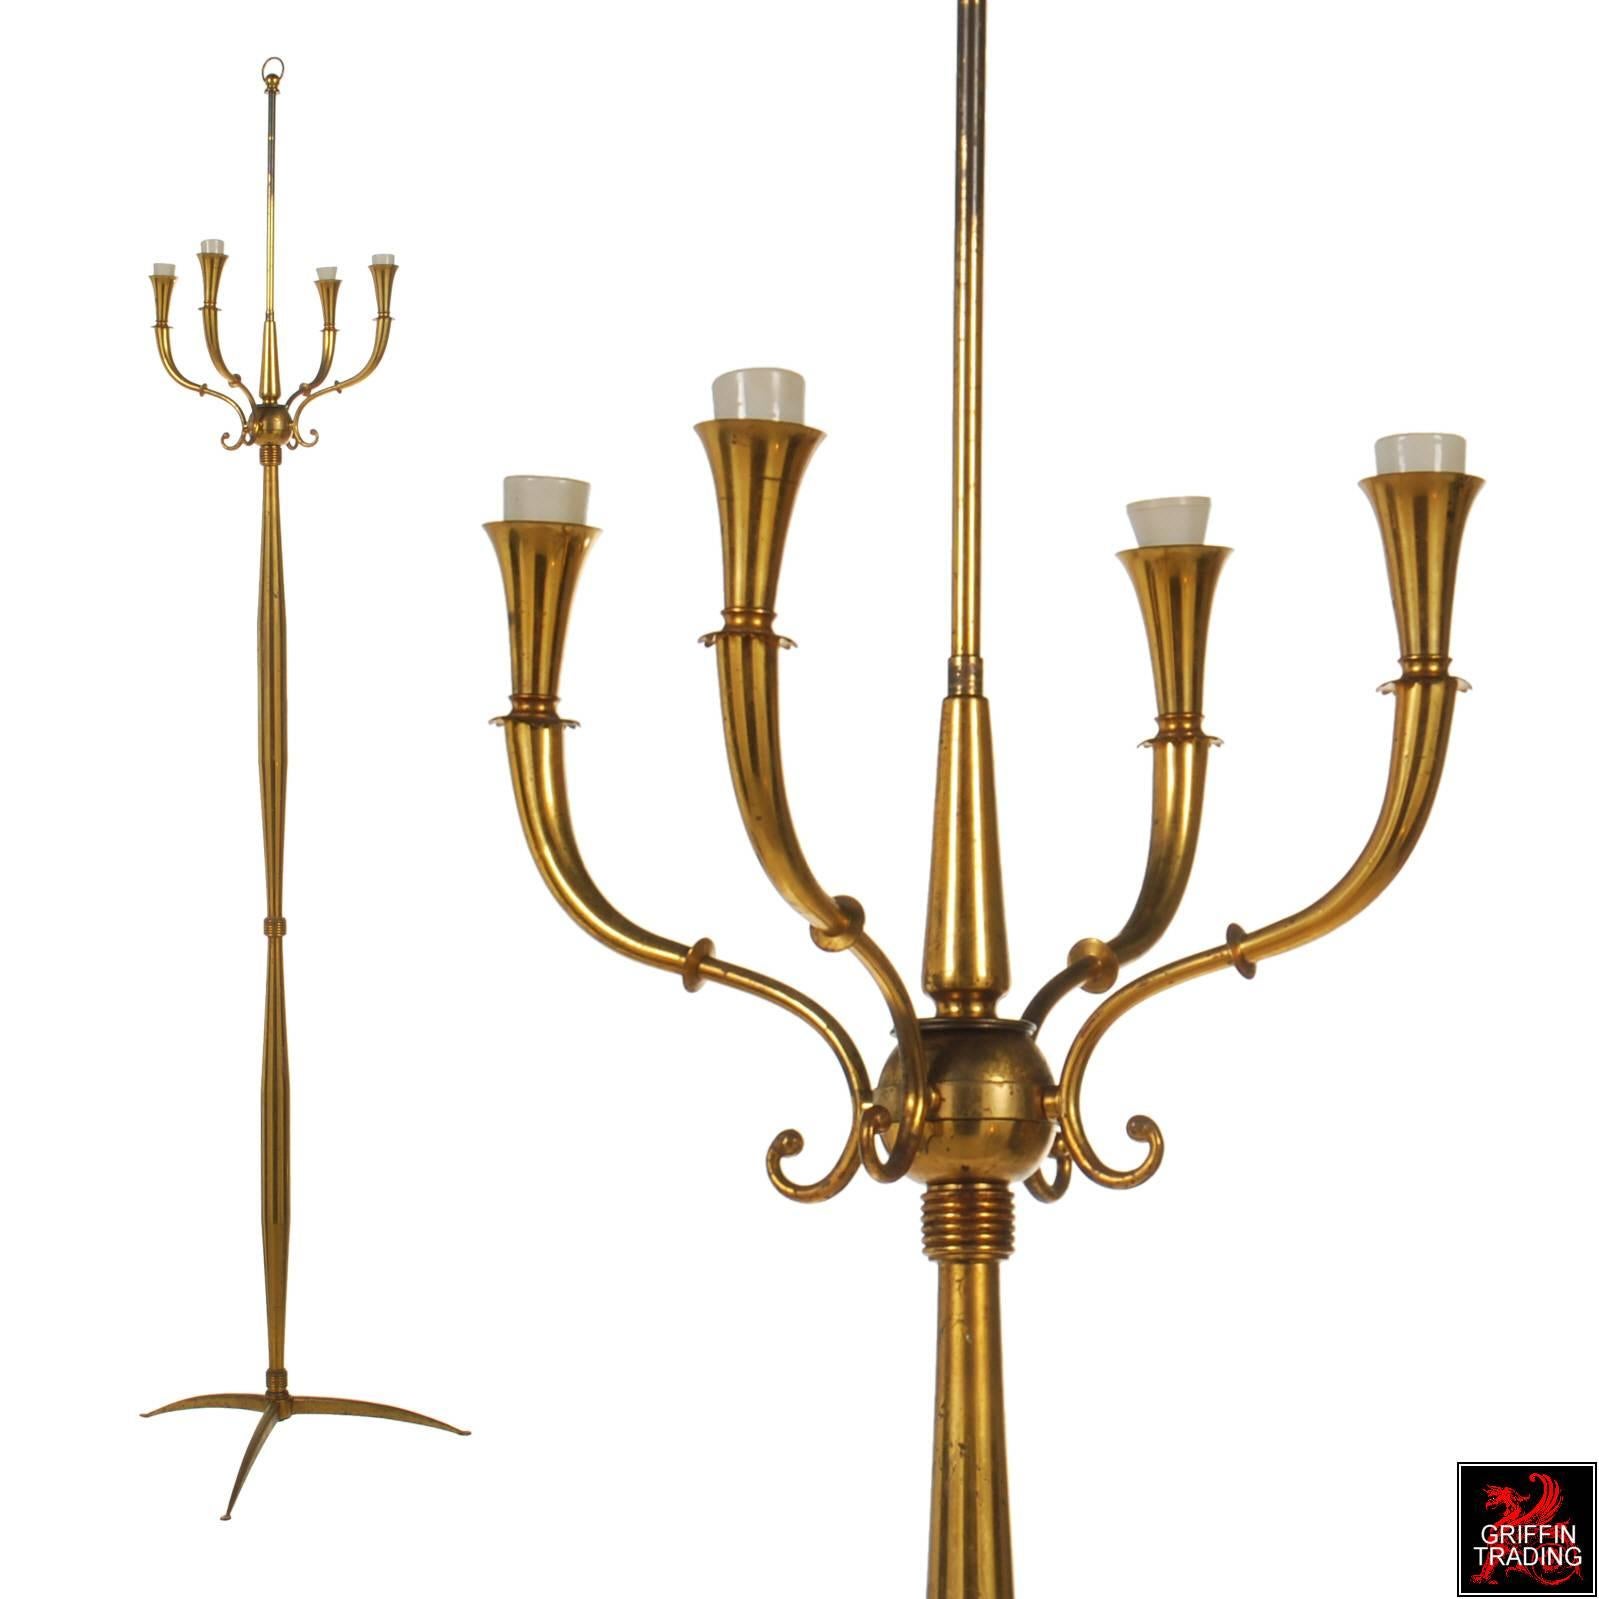 This very stylish 1940s-1950s Italian brass floor lamp has many fine elegant details from top to bottom, especially the fluted arms with scalloped bobeches. The four lights would ideally have had a shade, but you could easily remove the lampshade